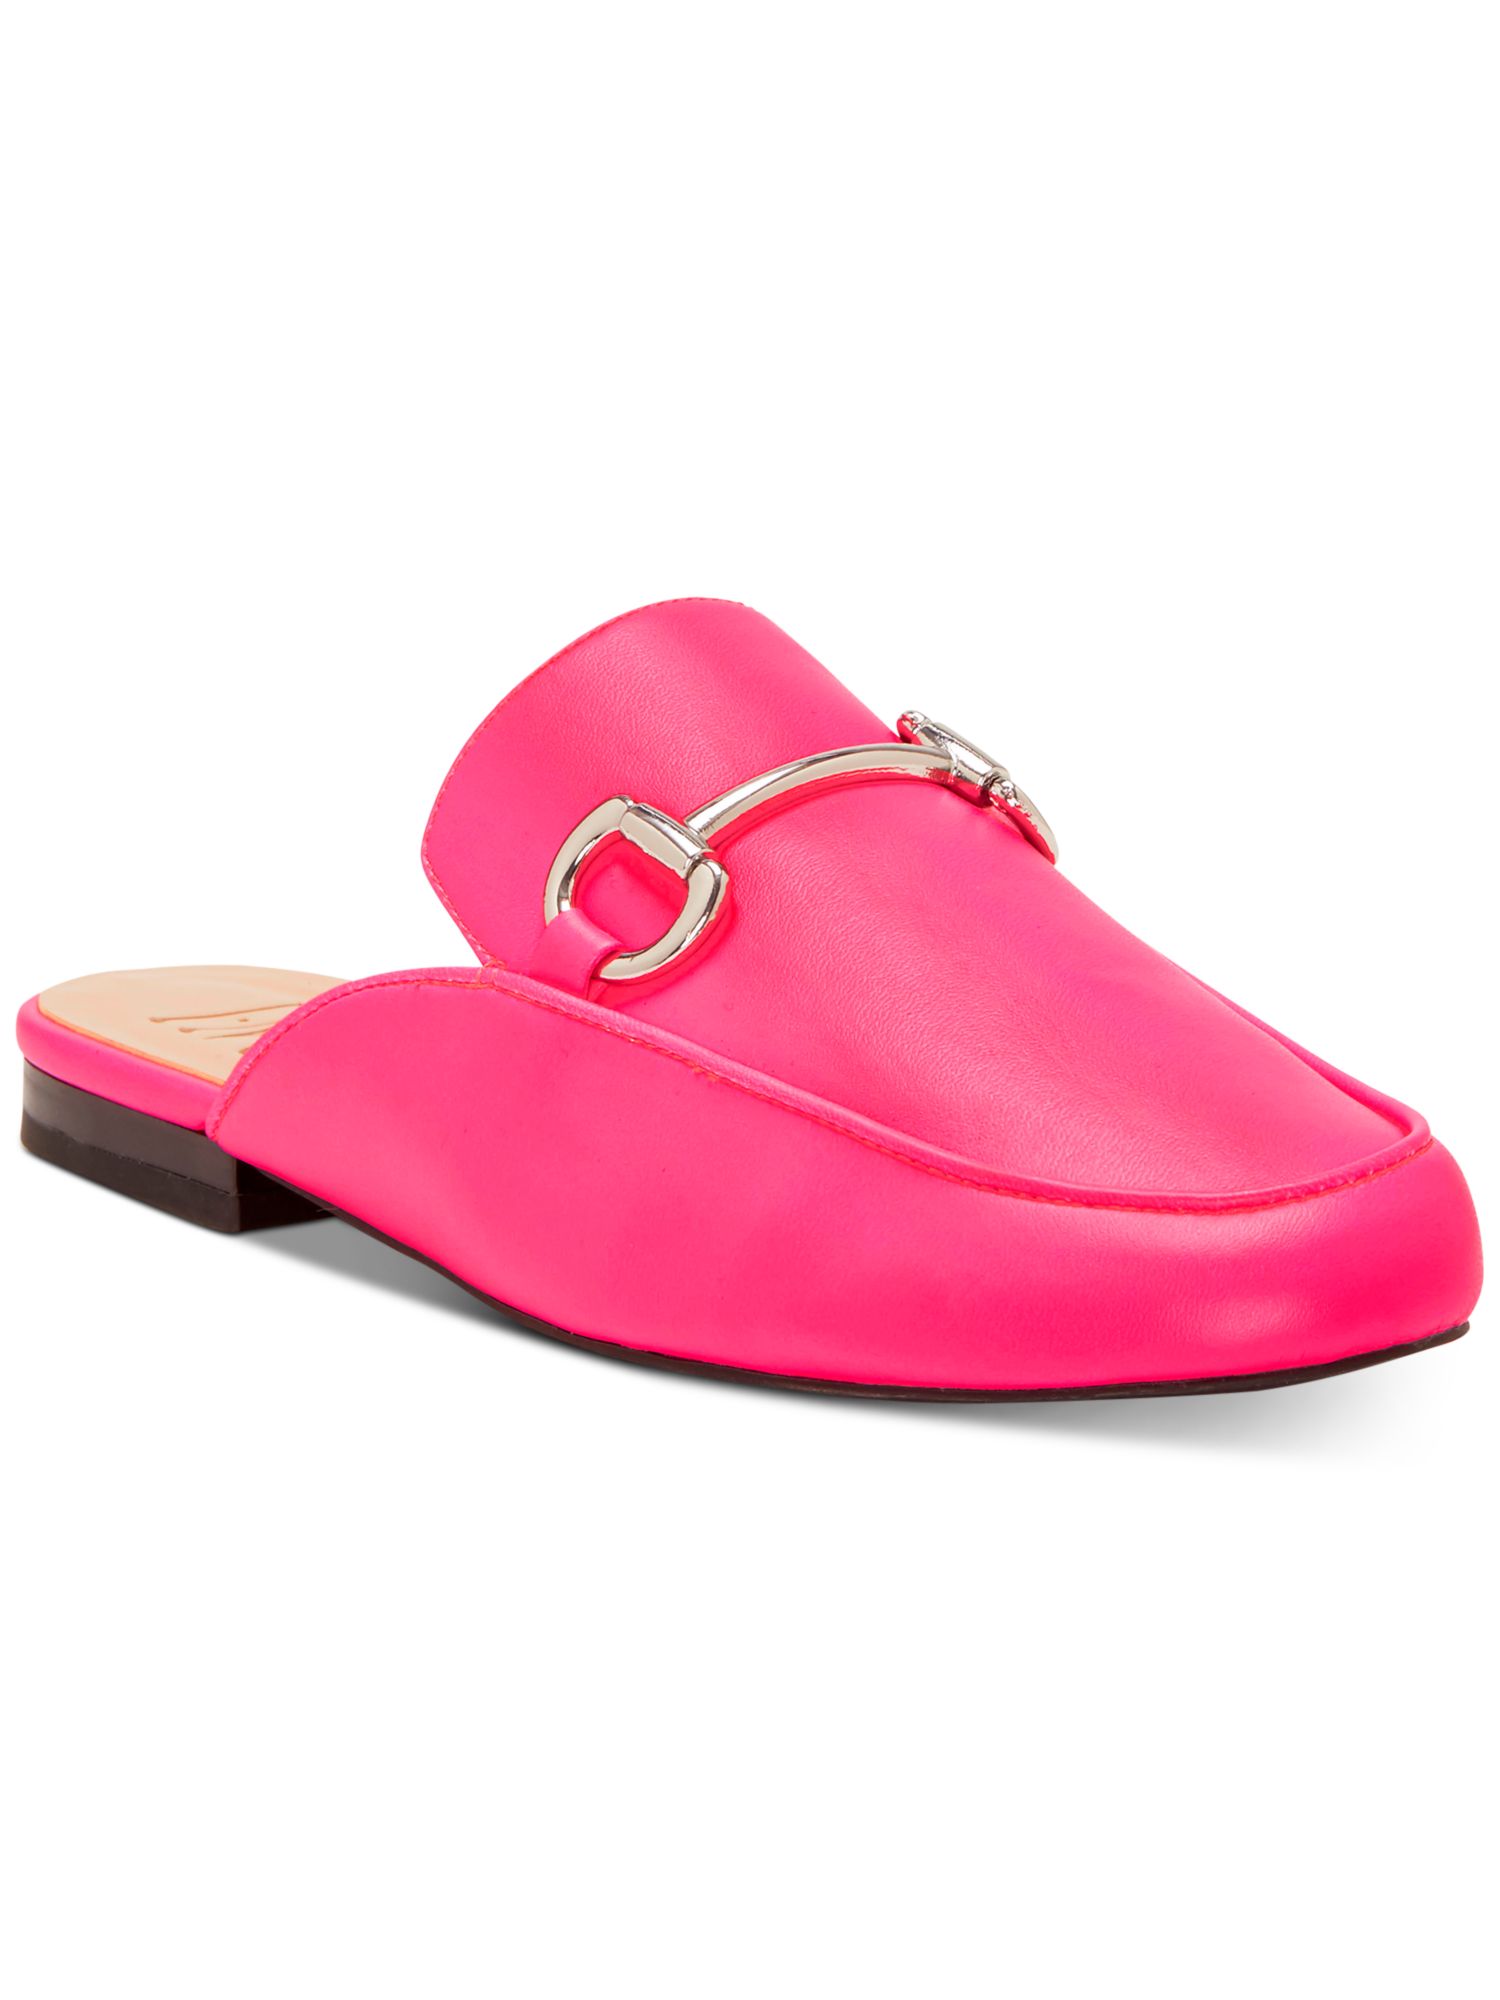 International Concepts INC Womens Pink Cushioned Buckle Accent Gilia Almond Toe Block Heel Slip On Mules 7 M